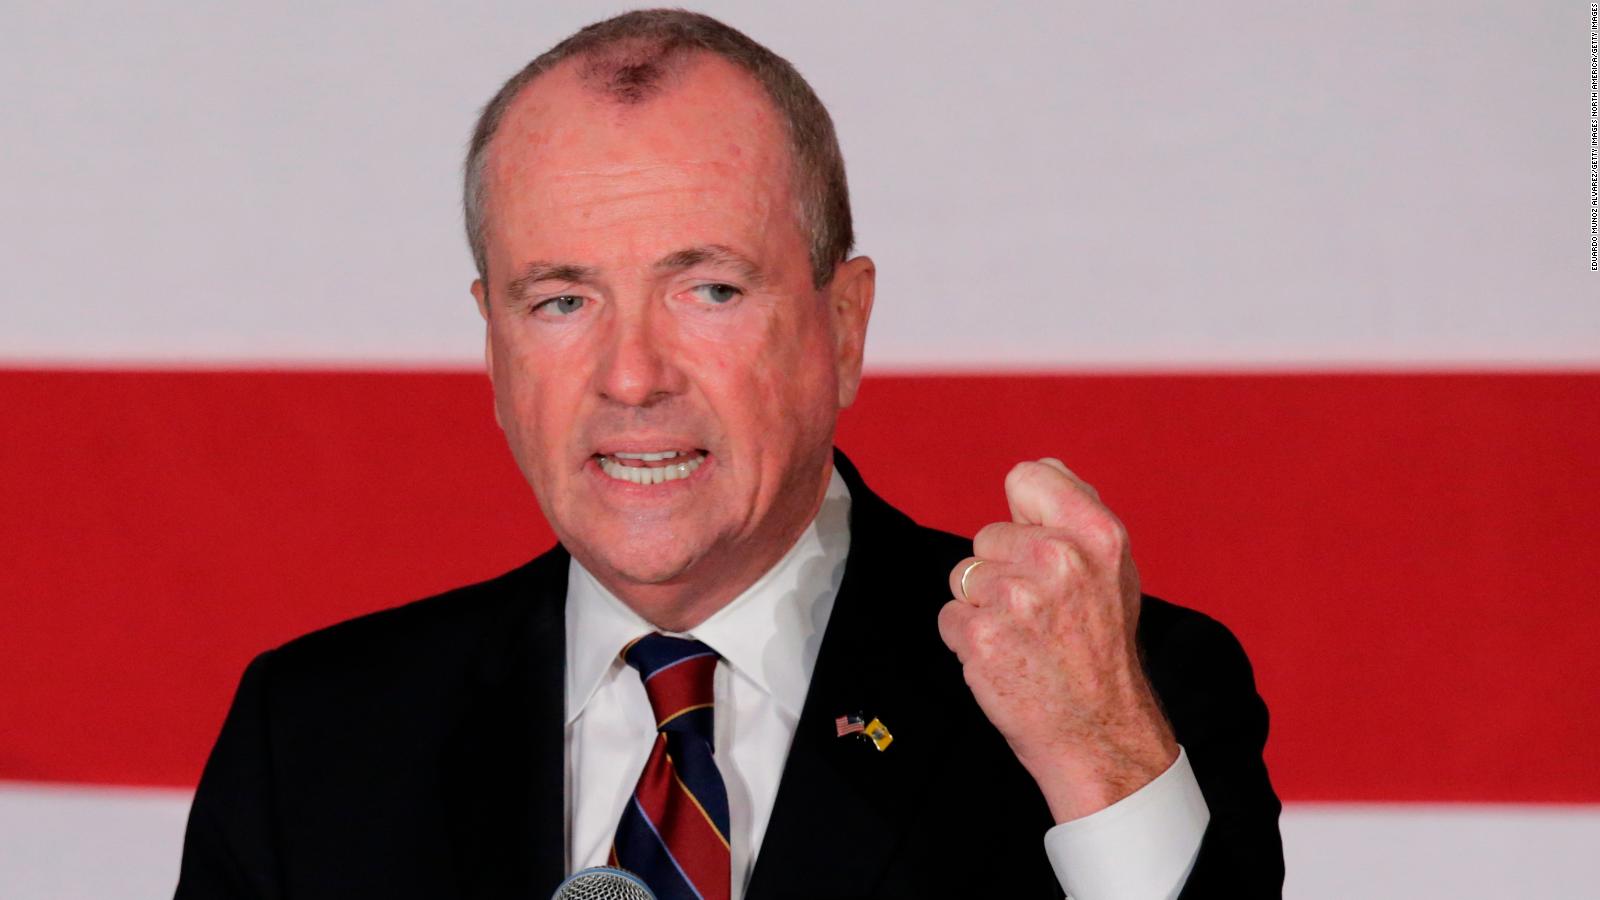 who won new jersey governor